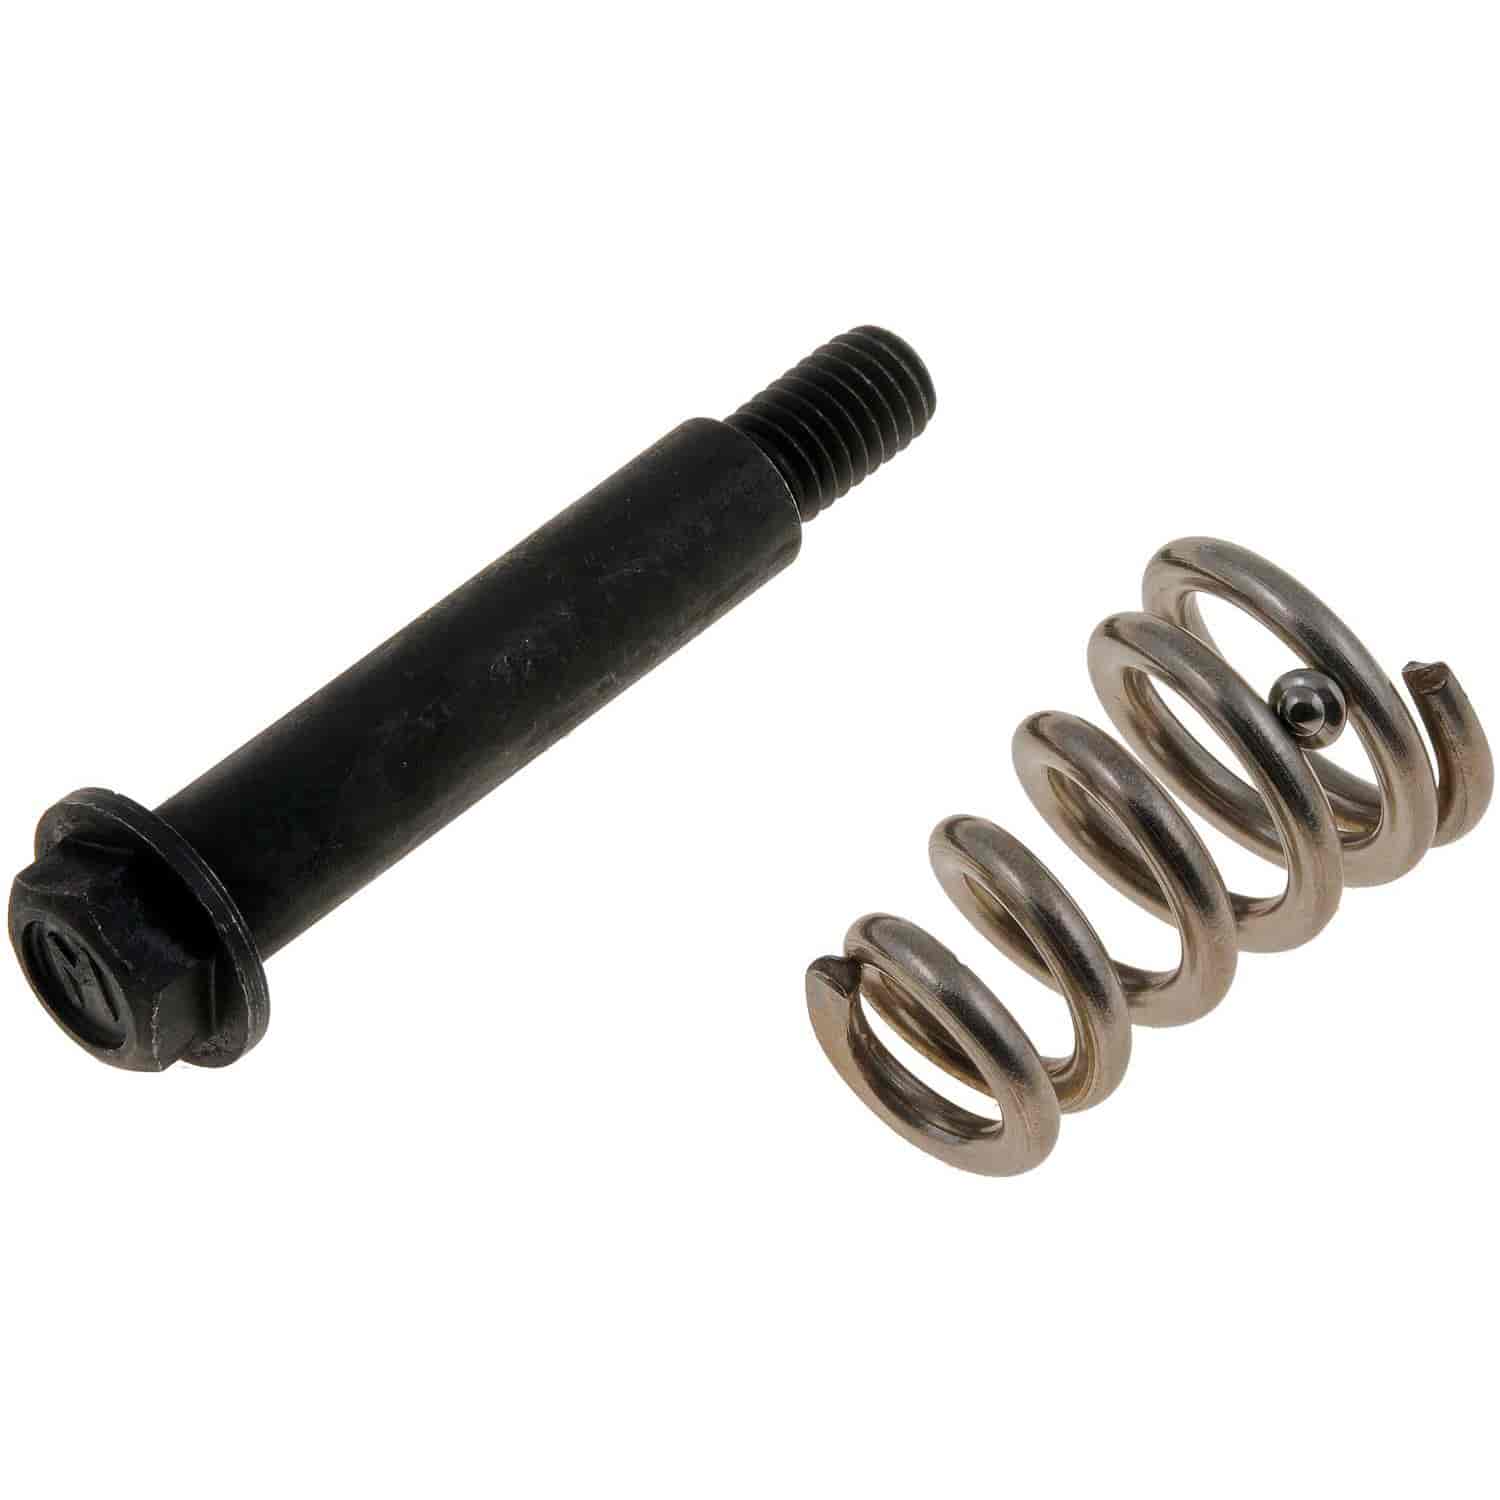 Manifold Bolt and Spring Kit - 3/8-16 x 2-13/16 In.